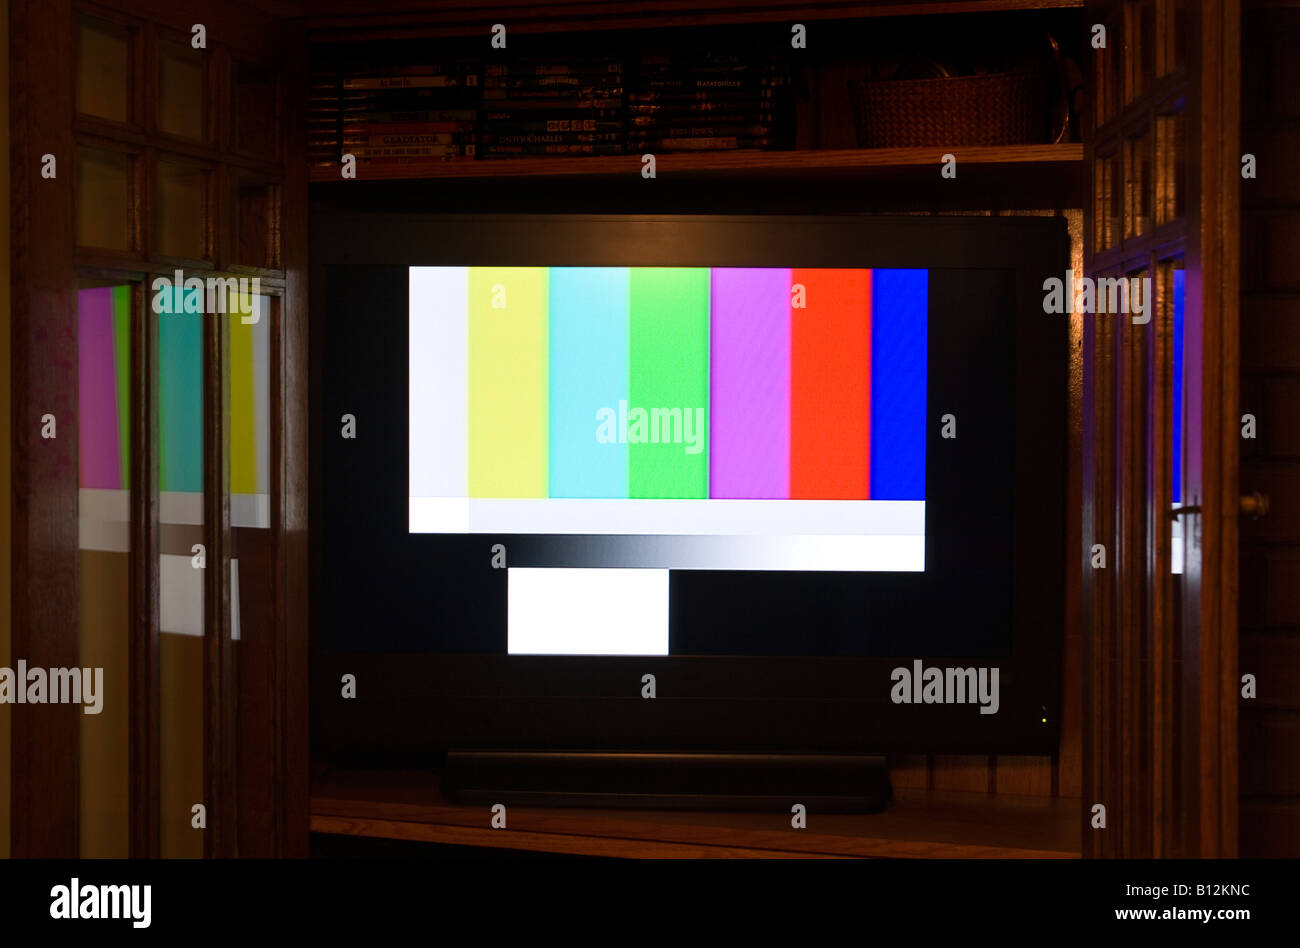 COLOR TEST CARD (© GEORGE HERSEE 1967) FLAT SCREEN TELEVISION (©SANYO CORP 2000) IN BUILT IN WOODEN CABINET. Stock Photo